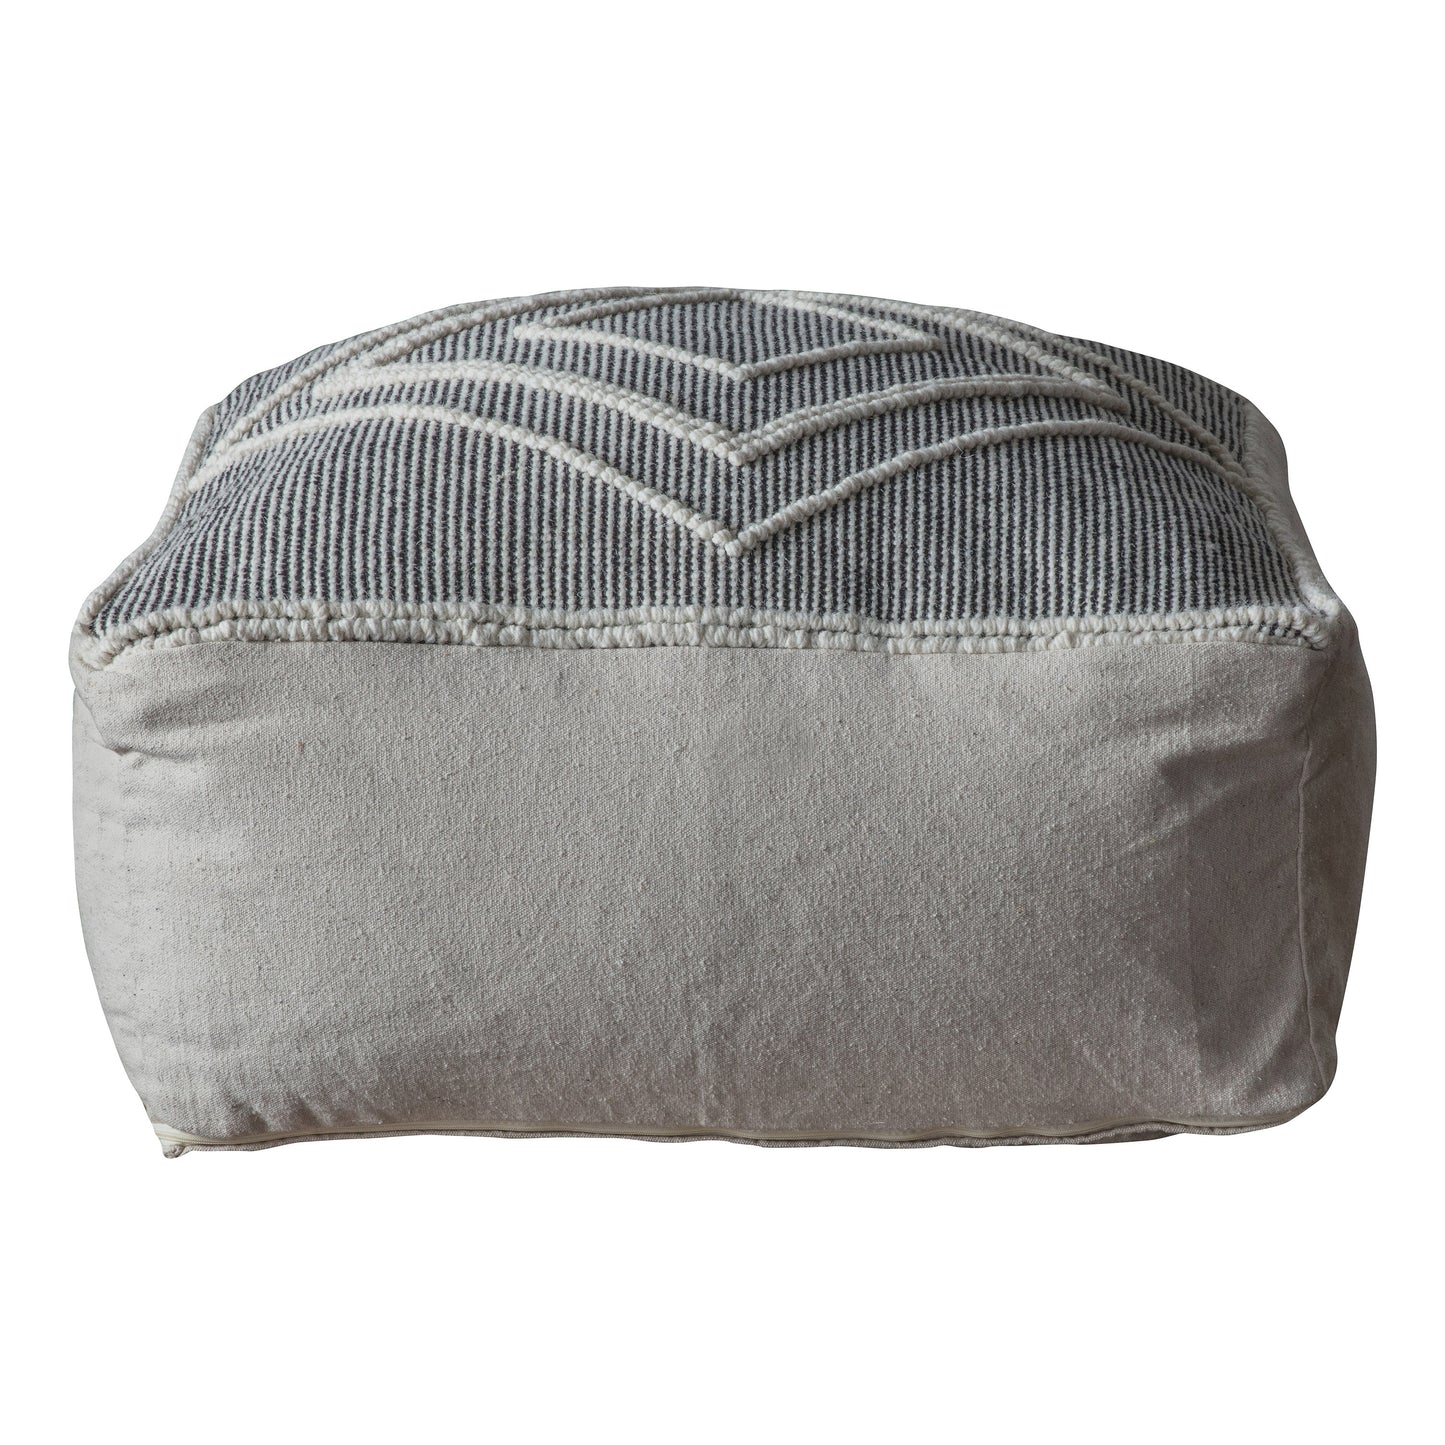 Load image into Gallery viewer, A Soto Pouffe Grey 800x800x350mm by Kikiathome.co.uk, perfect for interior decor and home furniture, displayed on a white background.
